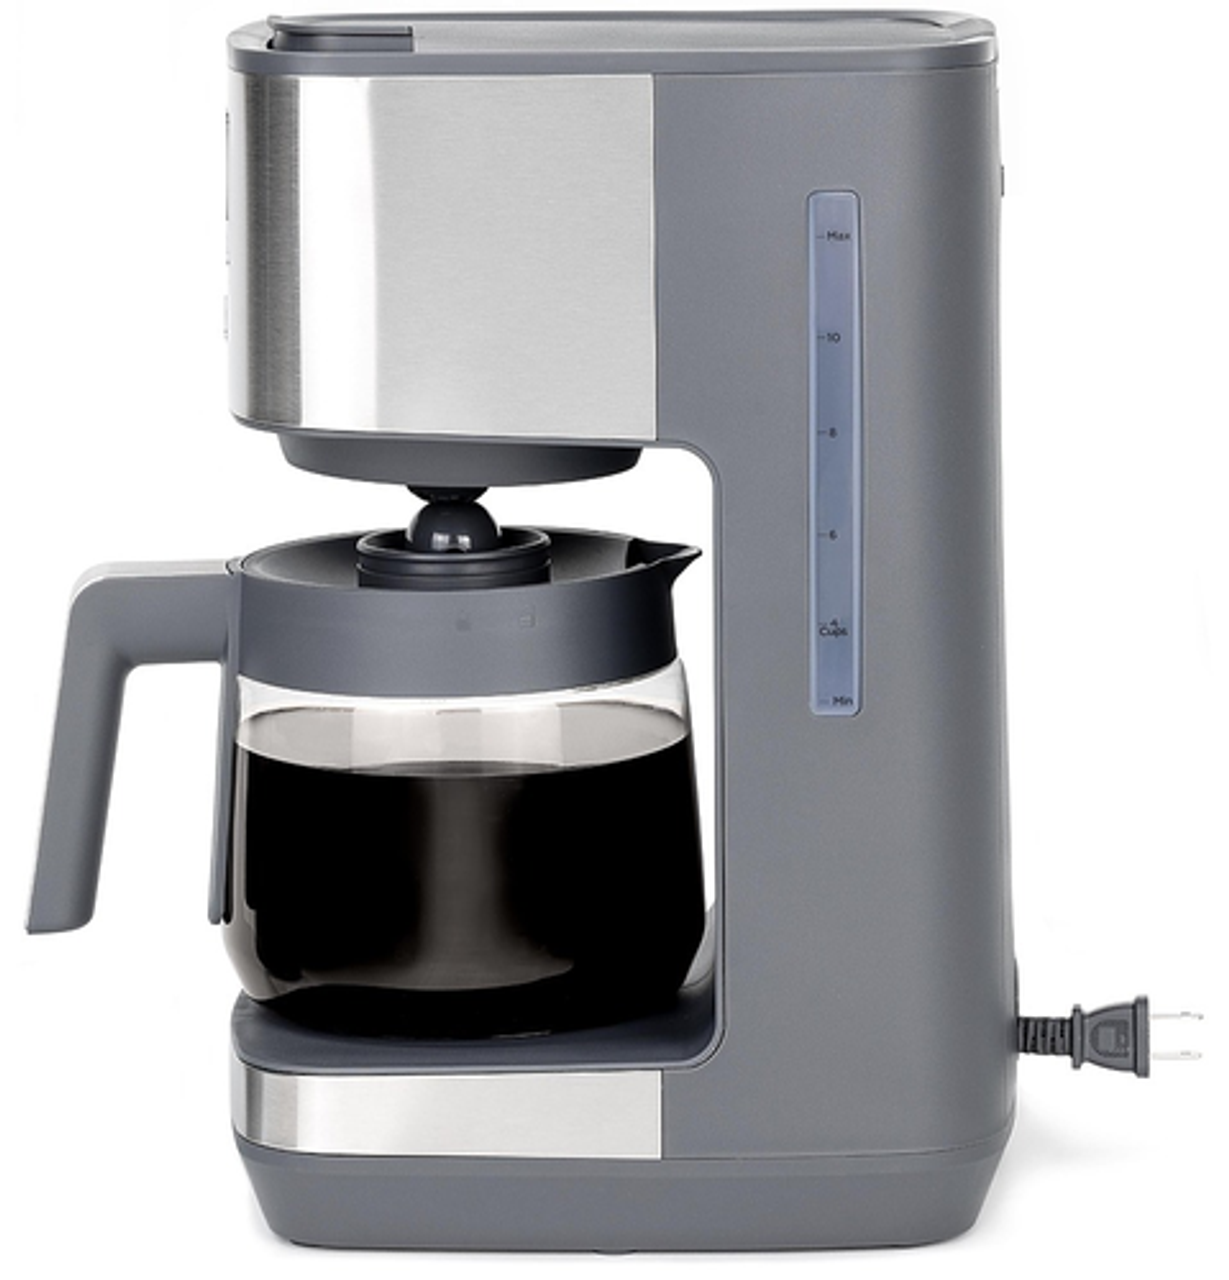 GE - 12 Cup Programmable Coffee Maker with Adjustable Keep Warm Plate and Glass Carafe - Stainless Steel